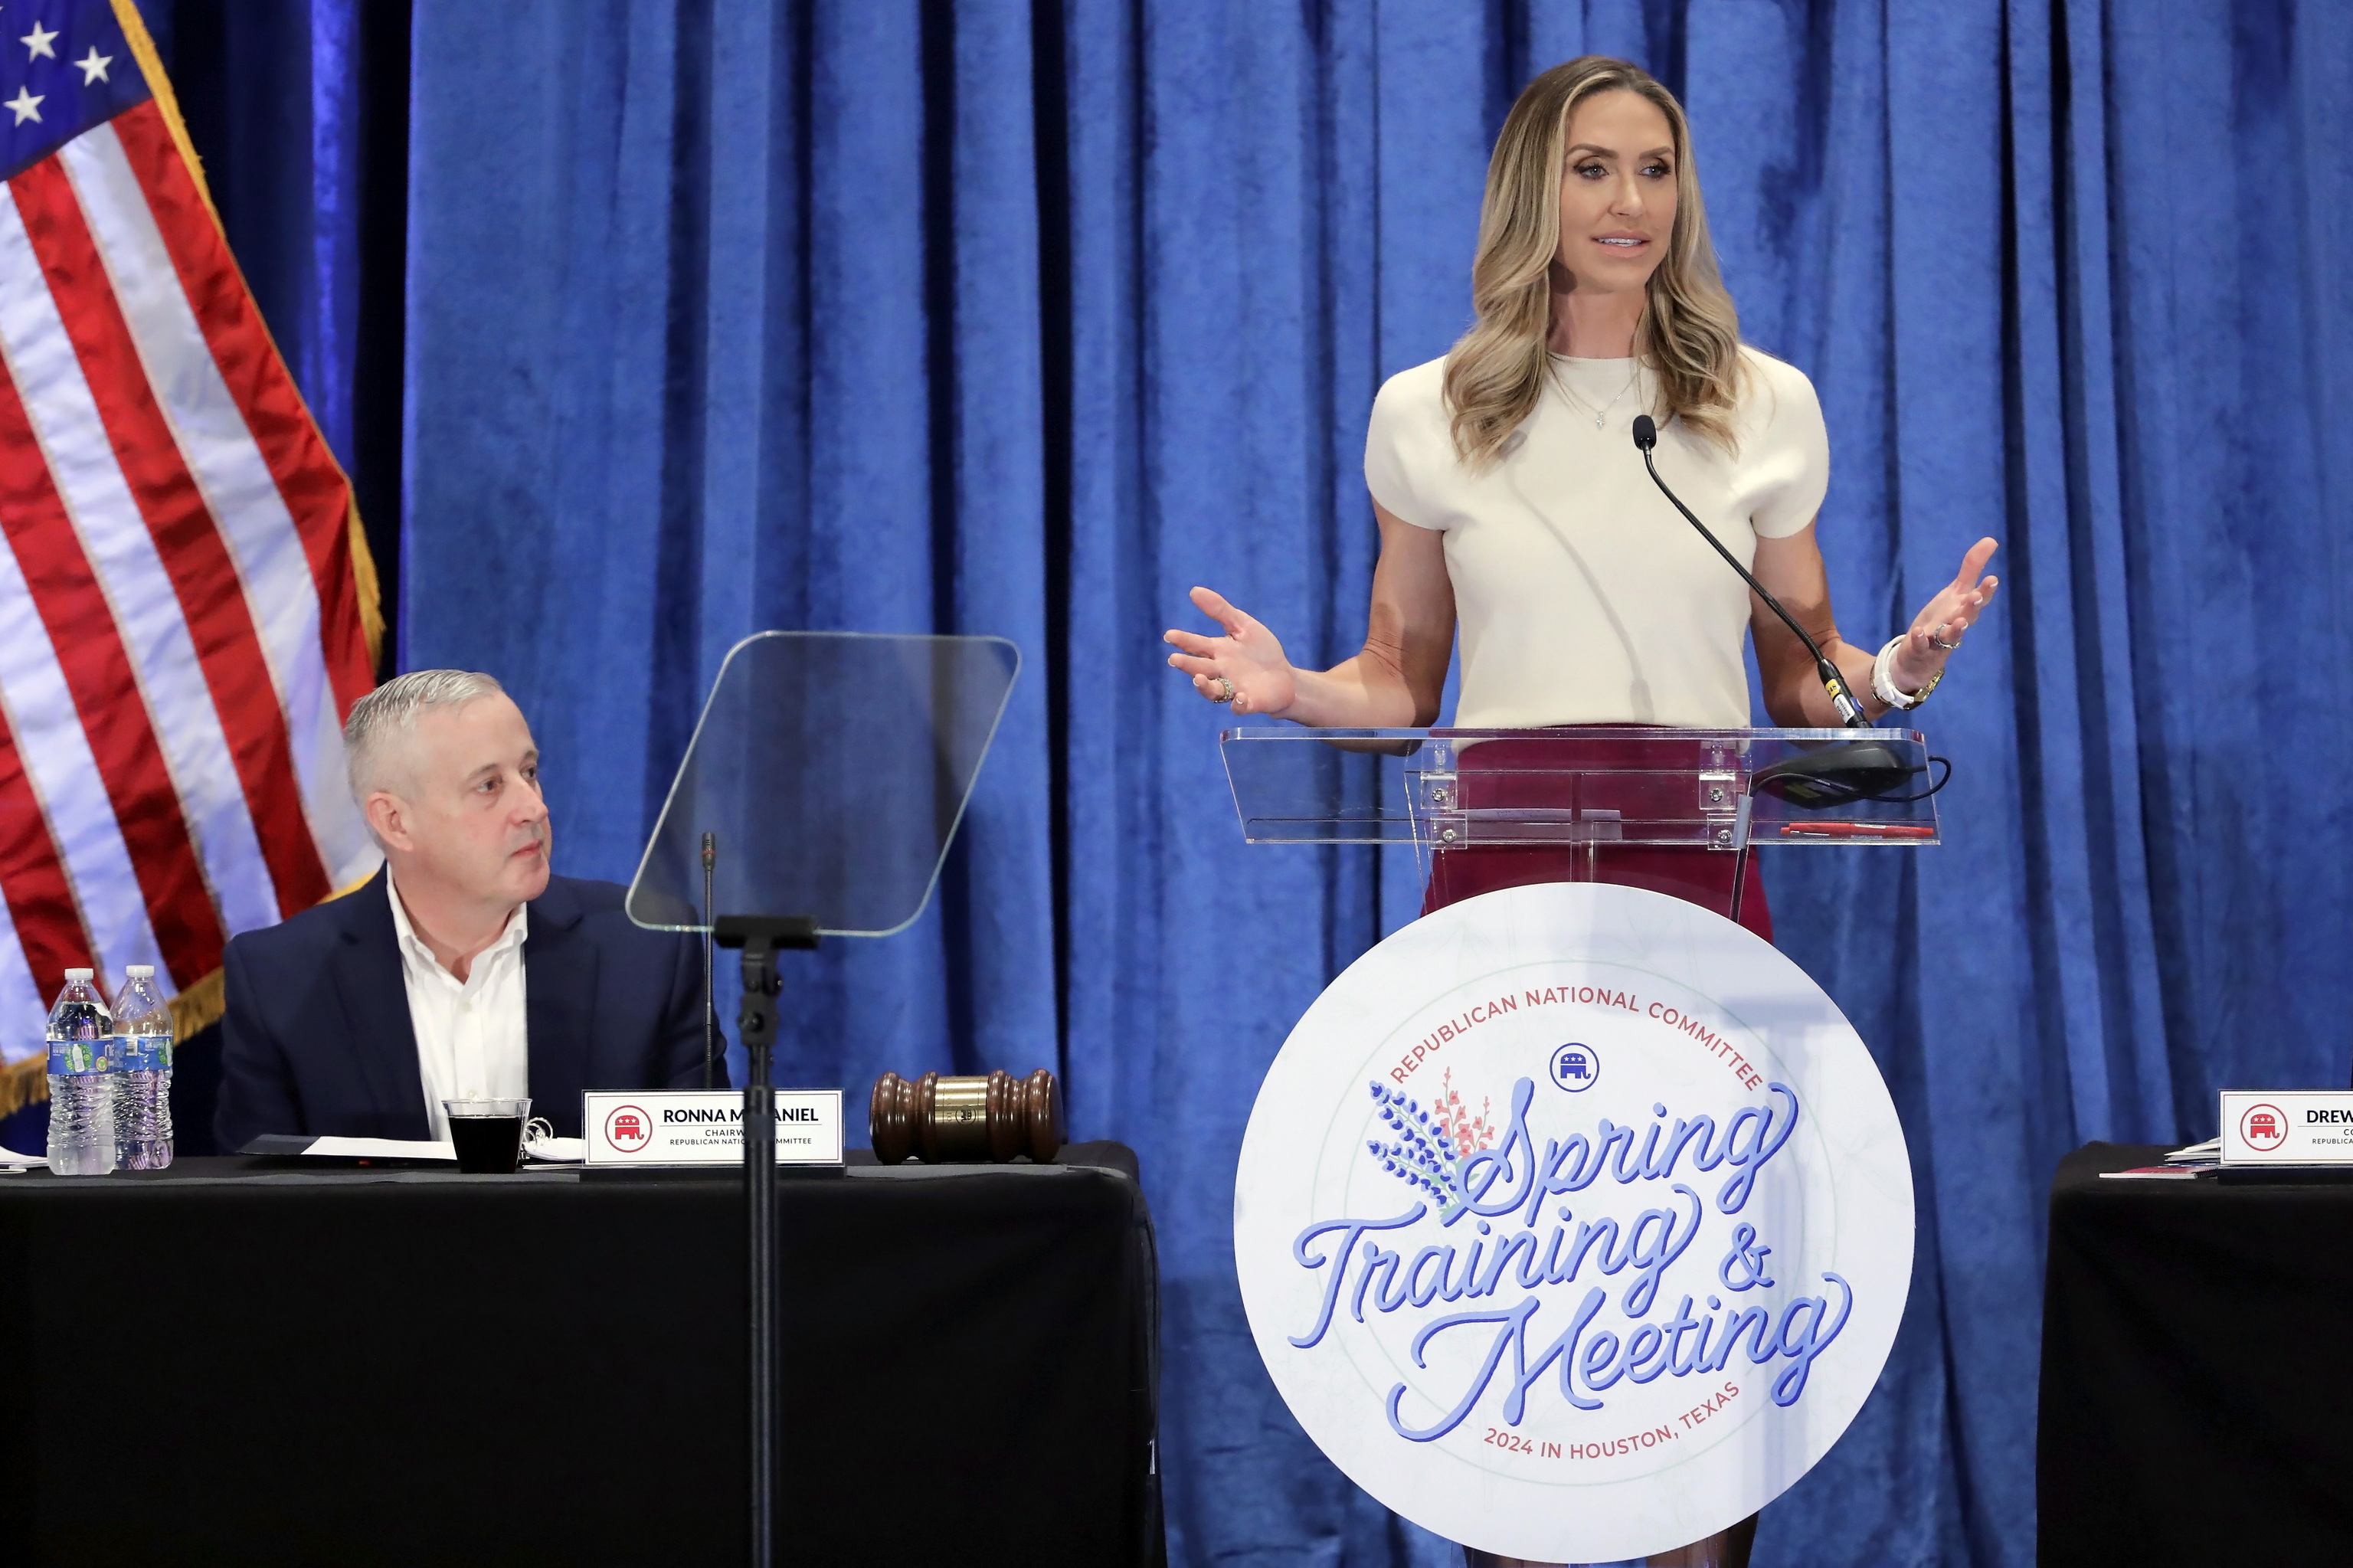 Lara Trump, the newly elected Republican National Committee Co-Chair